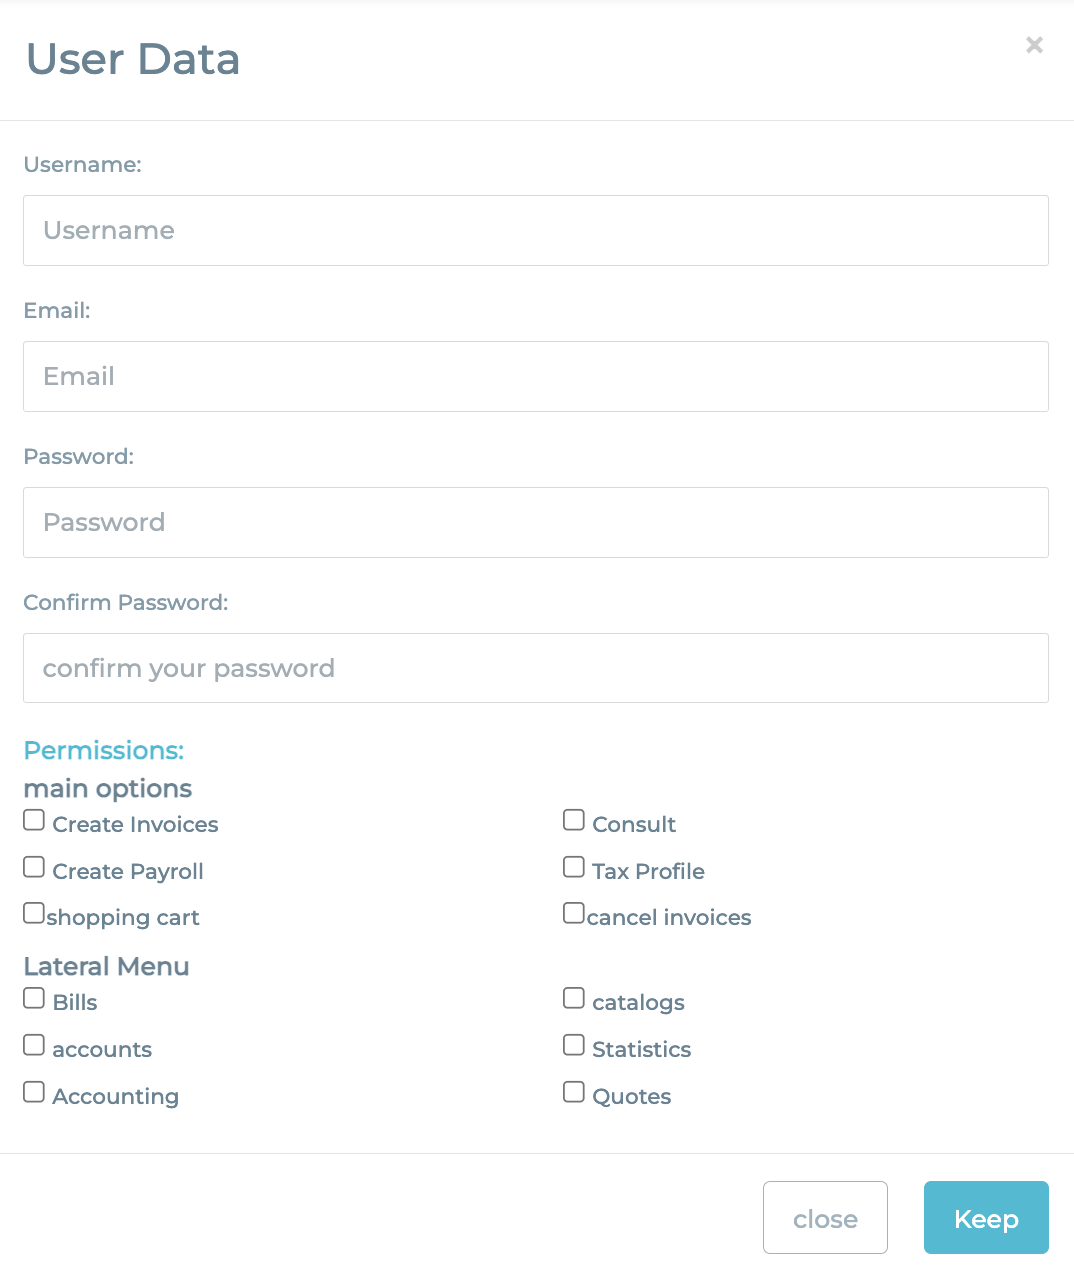 New user with fields to fill out and permissions to enable.